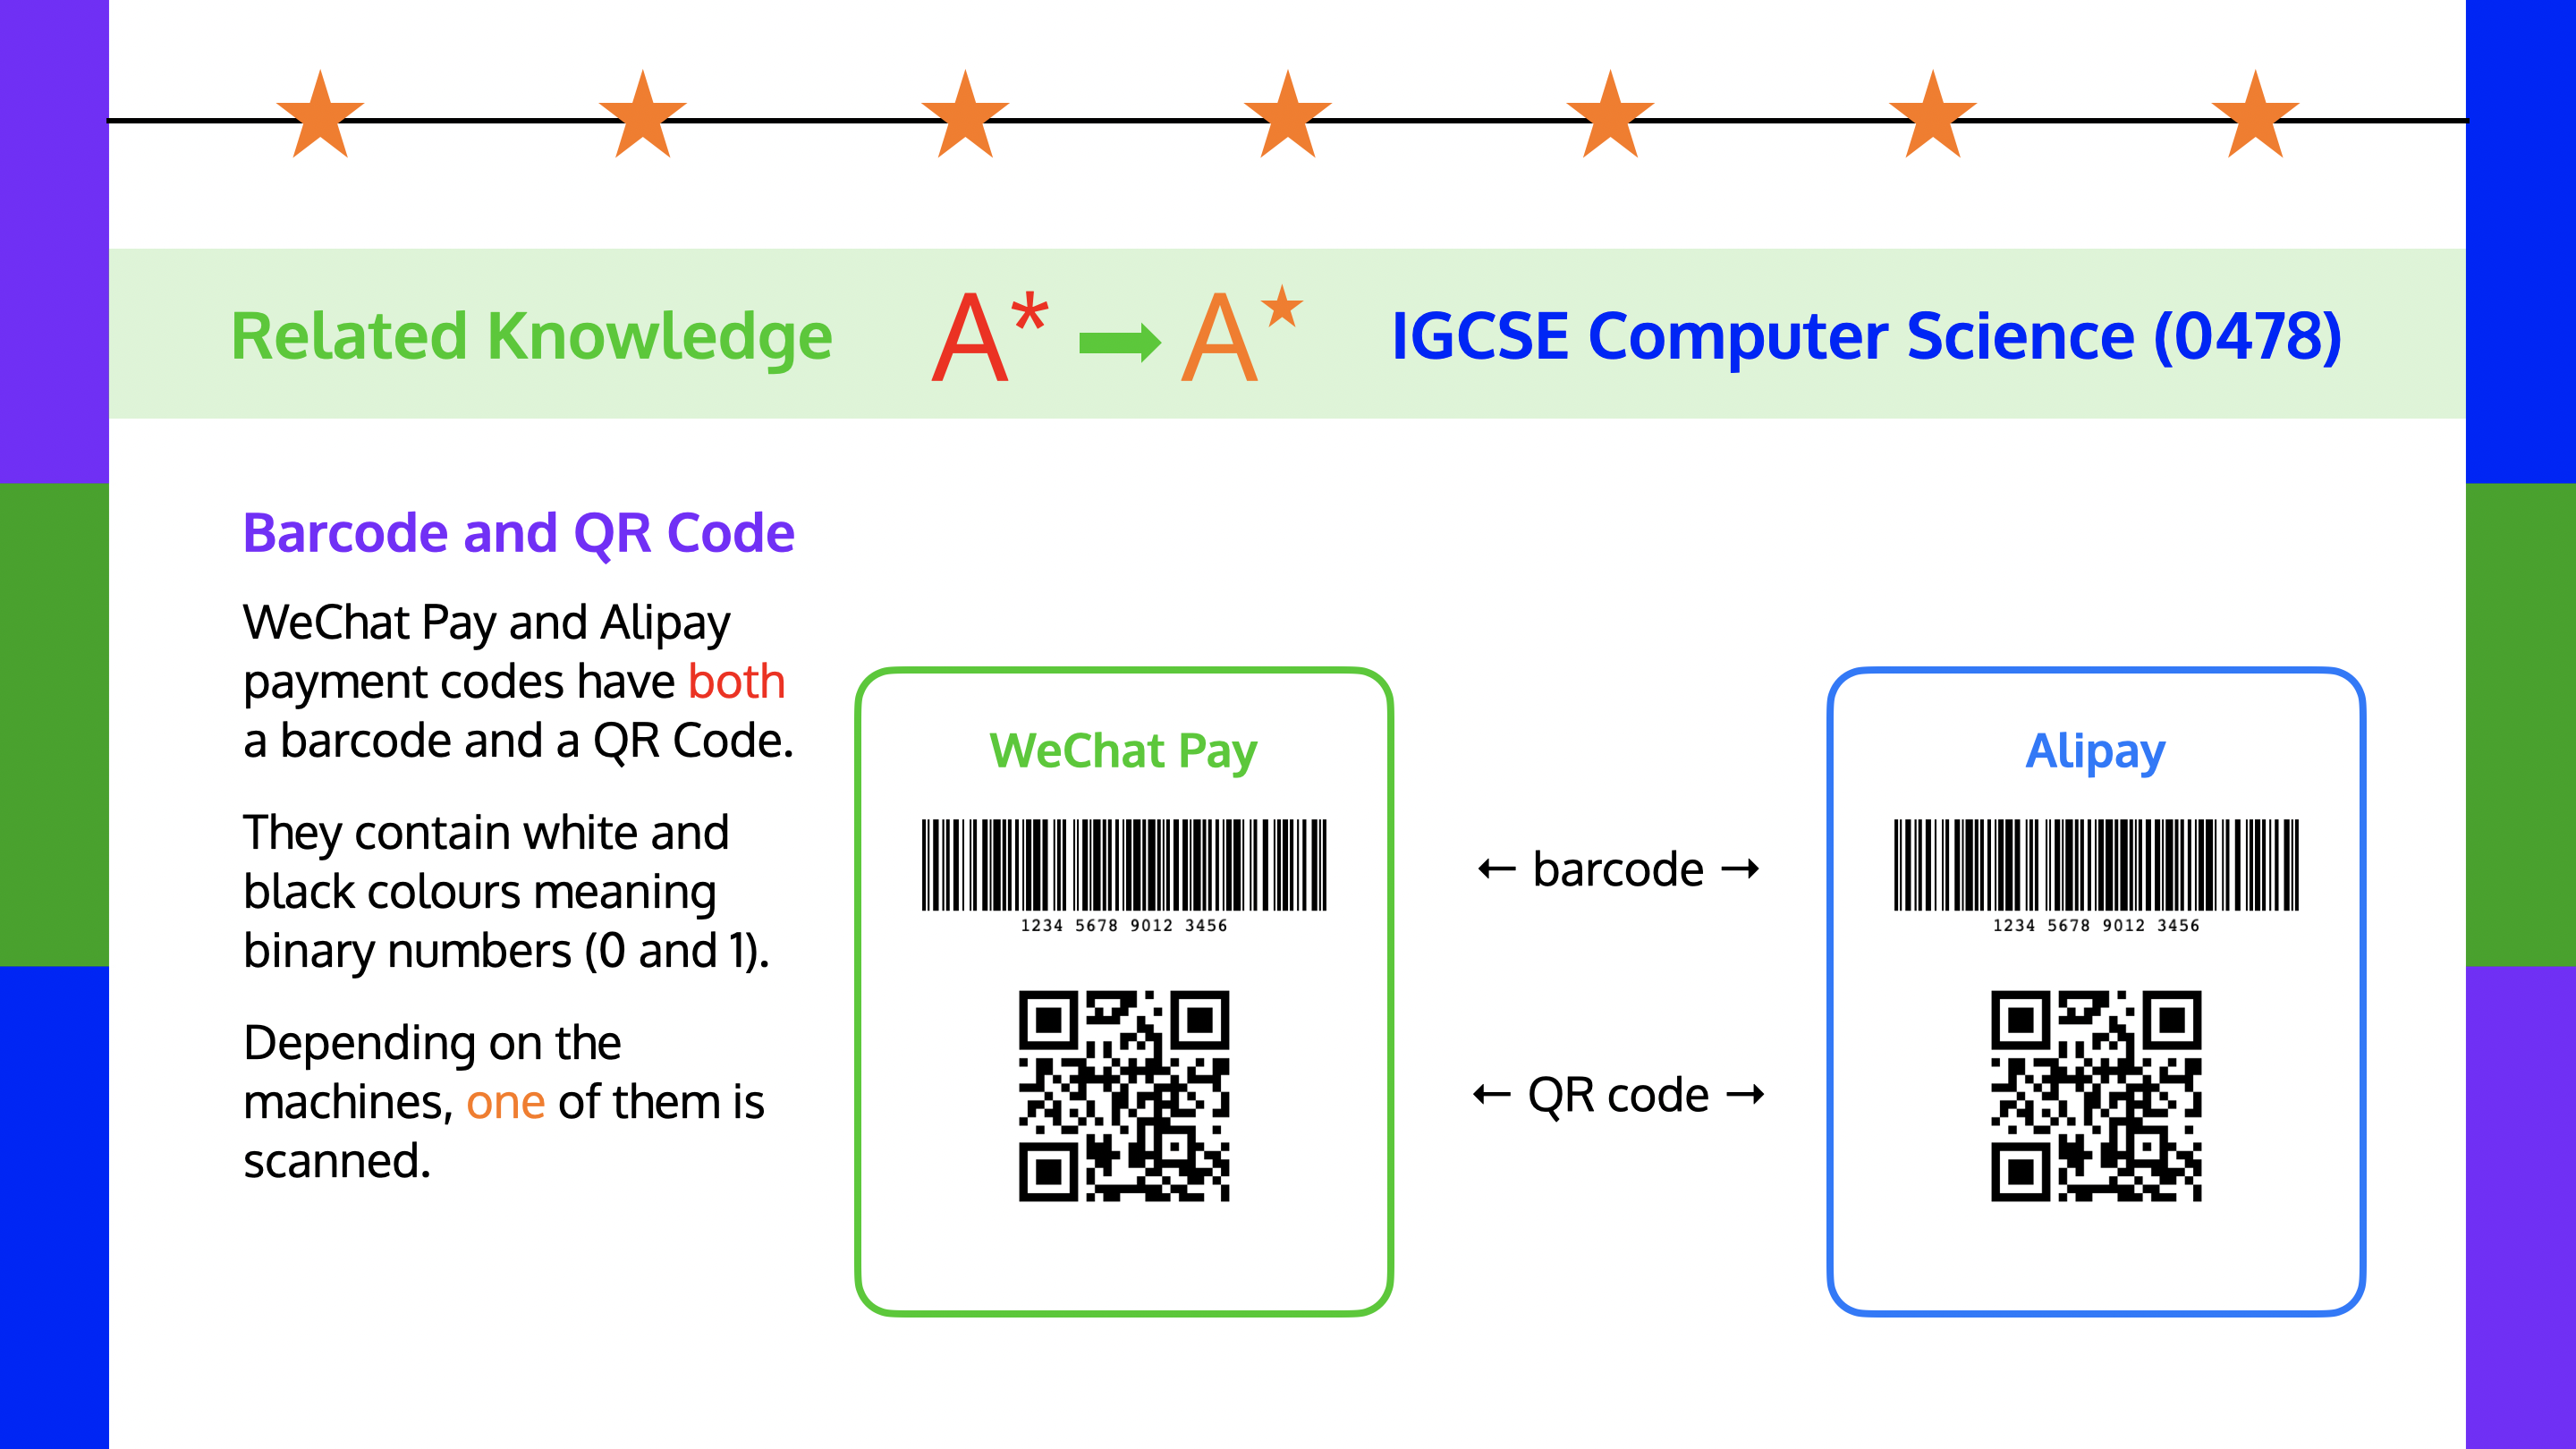 Barcode and QR Code in WeChat Pay and Alipay Payment Codes